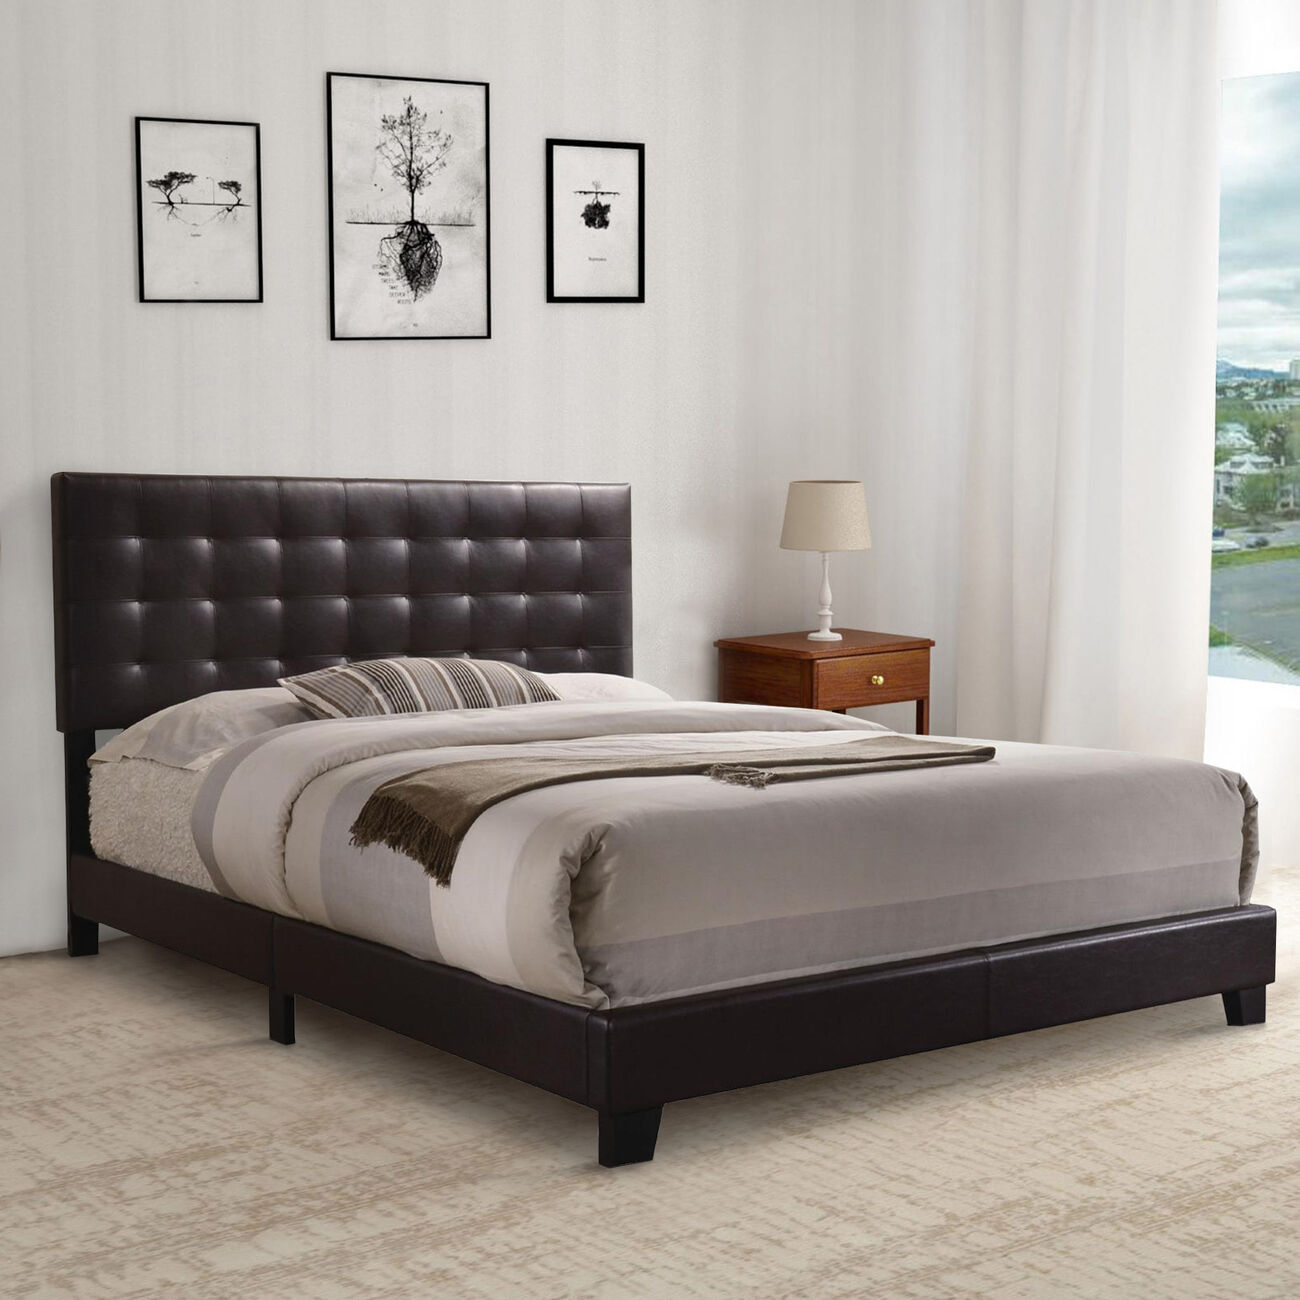 Sophistiated Transitional Style Queen Size Padded Bed, Brown